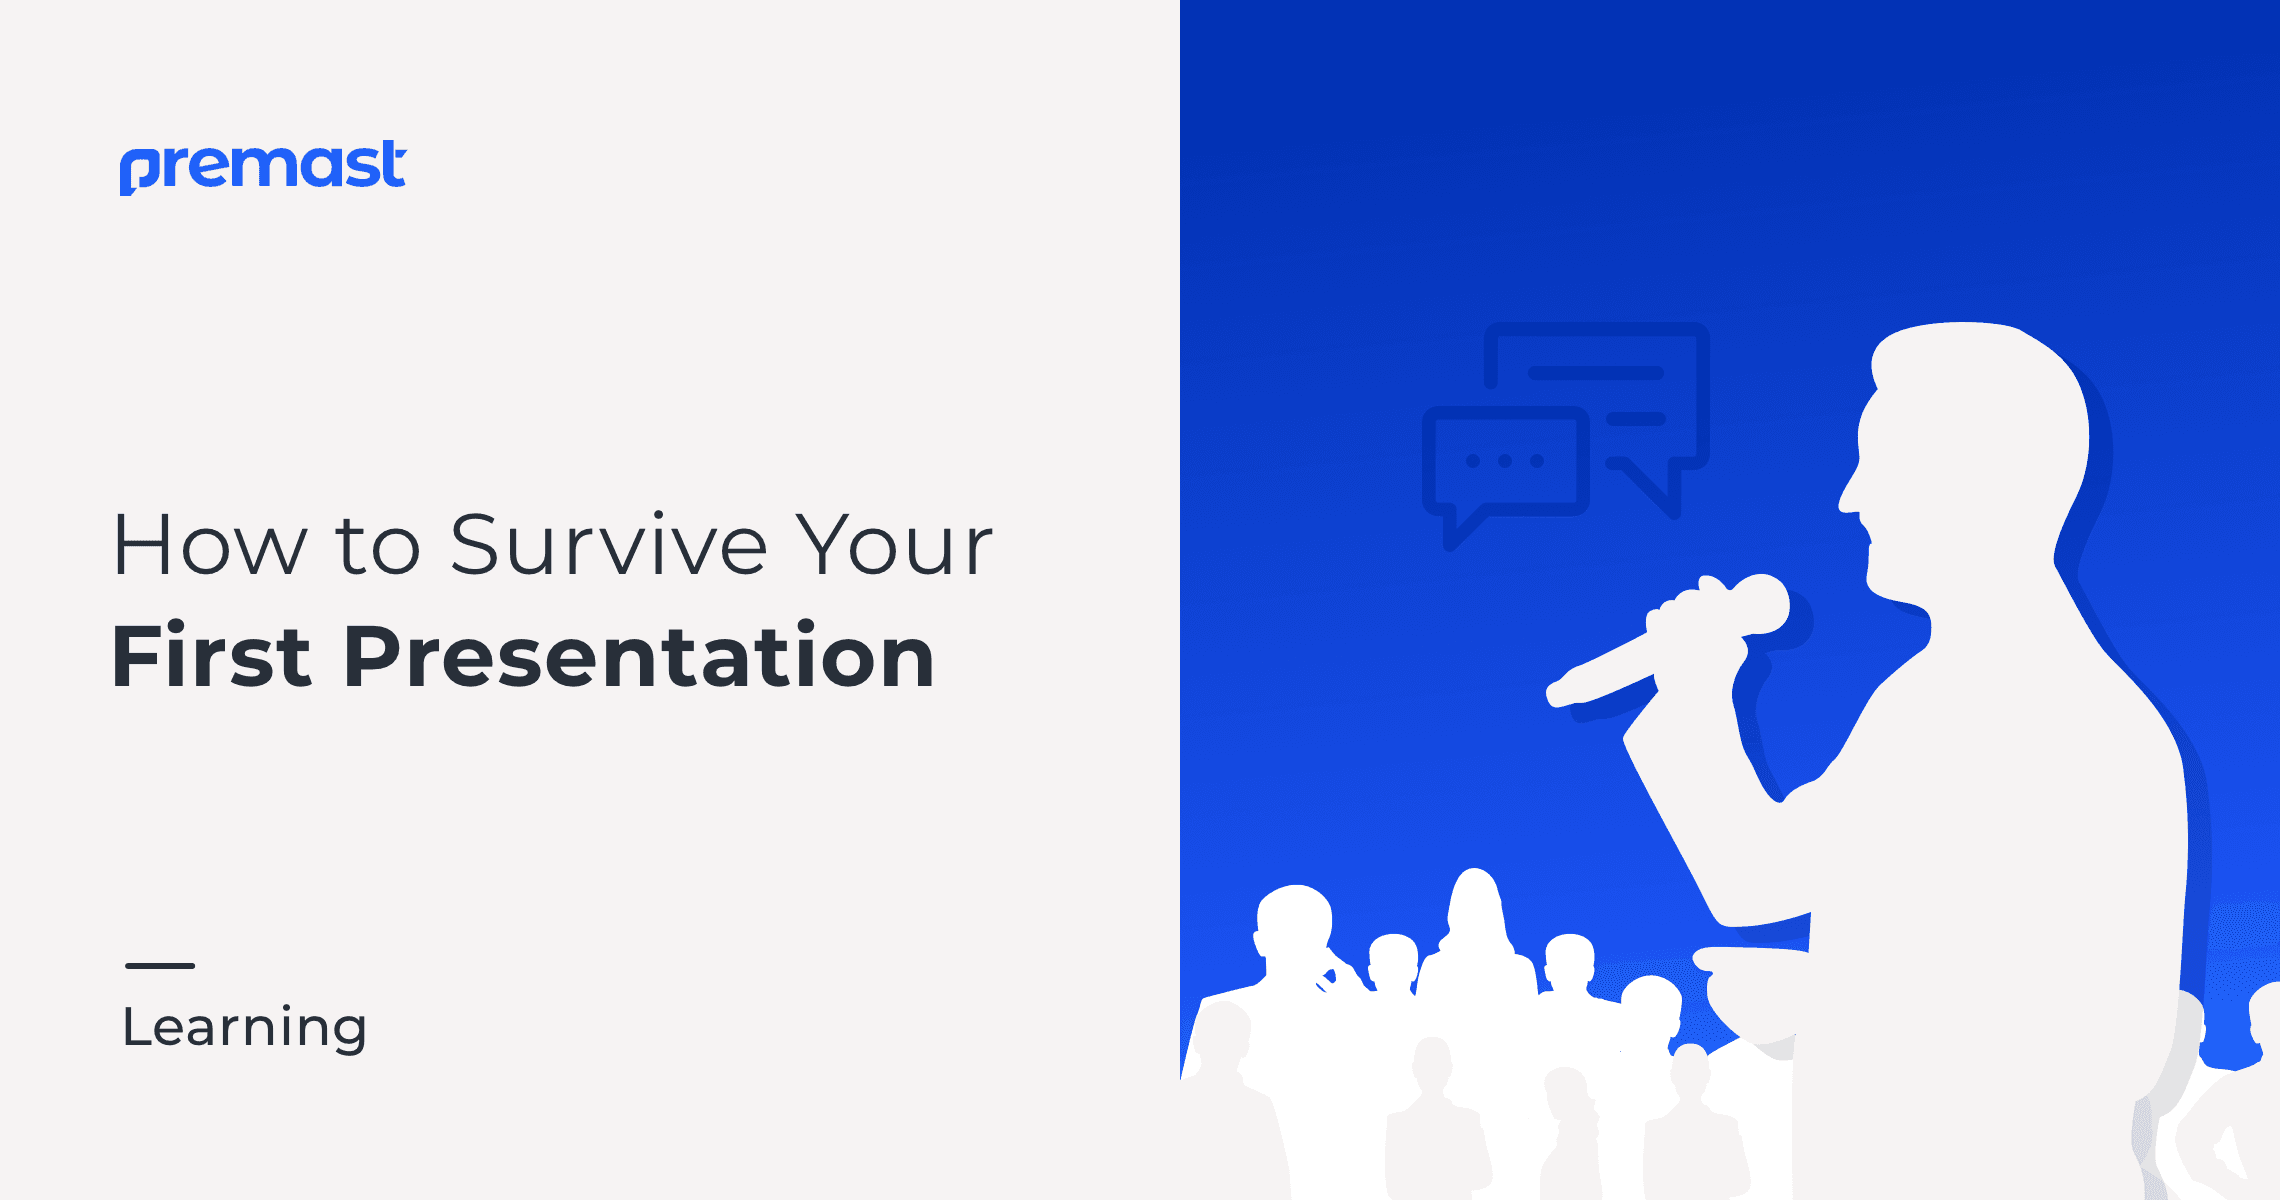 How to Survive Your First Presentation!